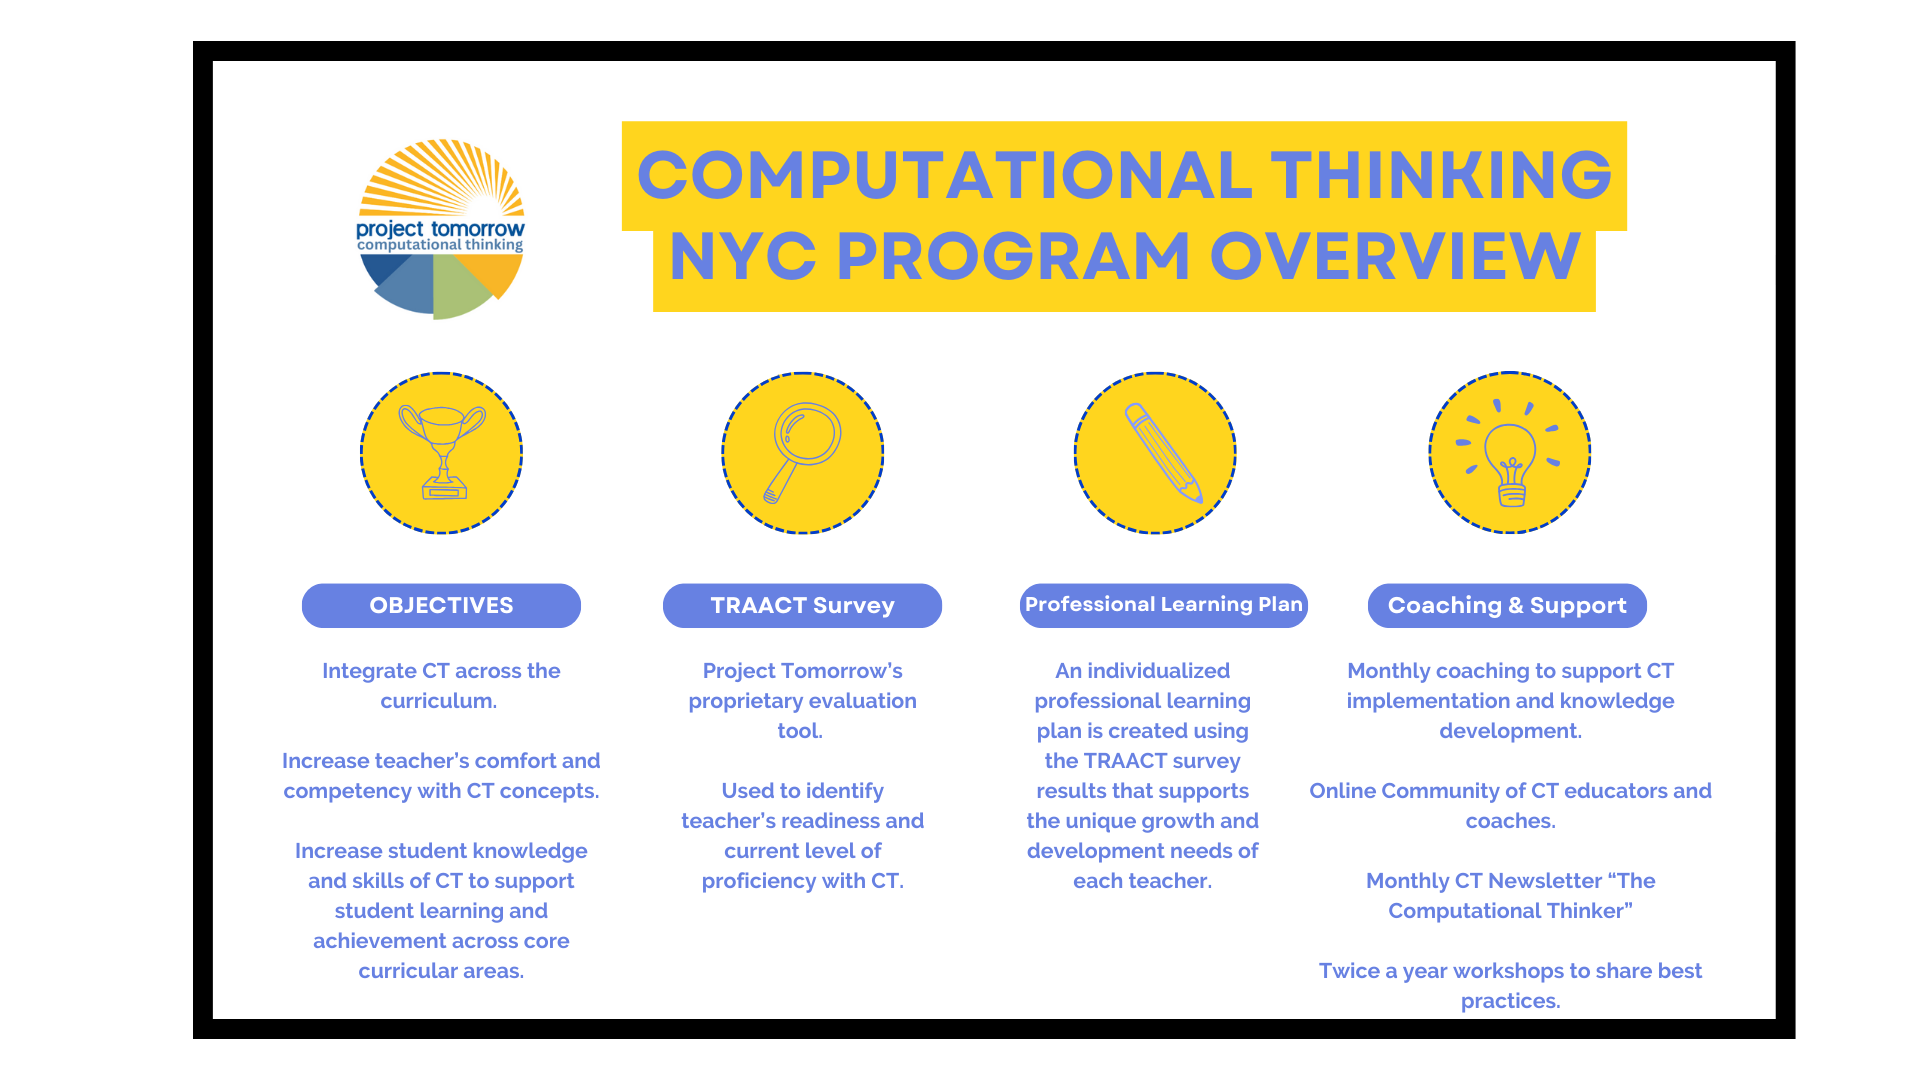 Computational Thinking NYC Program Overview 

Objectives: Integrate CT across the curriculum. 

Increase teacher’s comfort and competency with CT concepts.

Increase student knowledge and skills of CT to support student learning and achievement across core curricular areas

TRAACT Survey: Project Tomorrow’s proprietary evaluation tool. 

Used to identify teacher’s readiness and current level of proficiency with CT.

Professional Learning: An individualized professional learning plan is created using the TRAACT survey results that supports the unique growth and development needs of each teacher.

Extended Supports: Monthly coaching to support CT implementation and knowledge development.

Online Community of CT educators and coaches.

Monthly CT Newsletter “The Computational Thinker”

Twice a year workshops to share best practices.